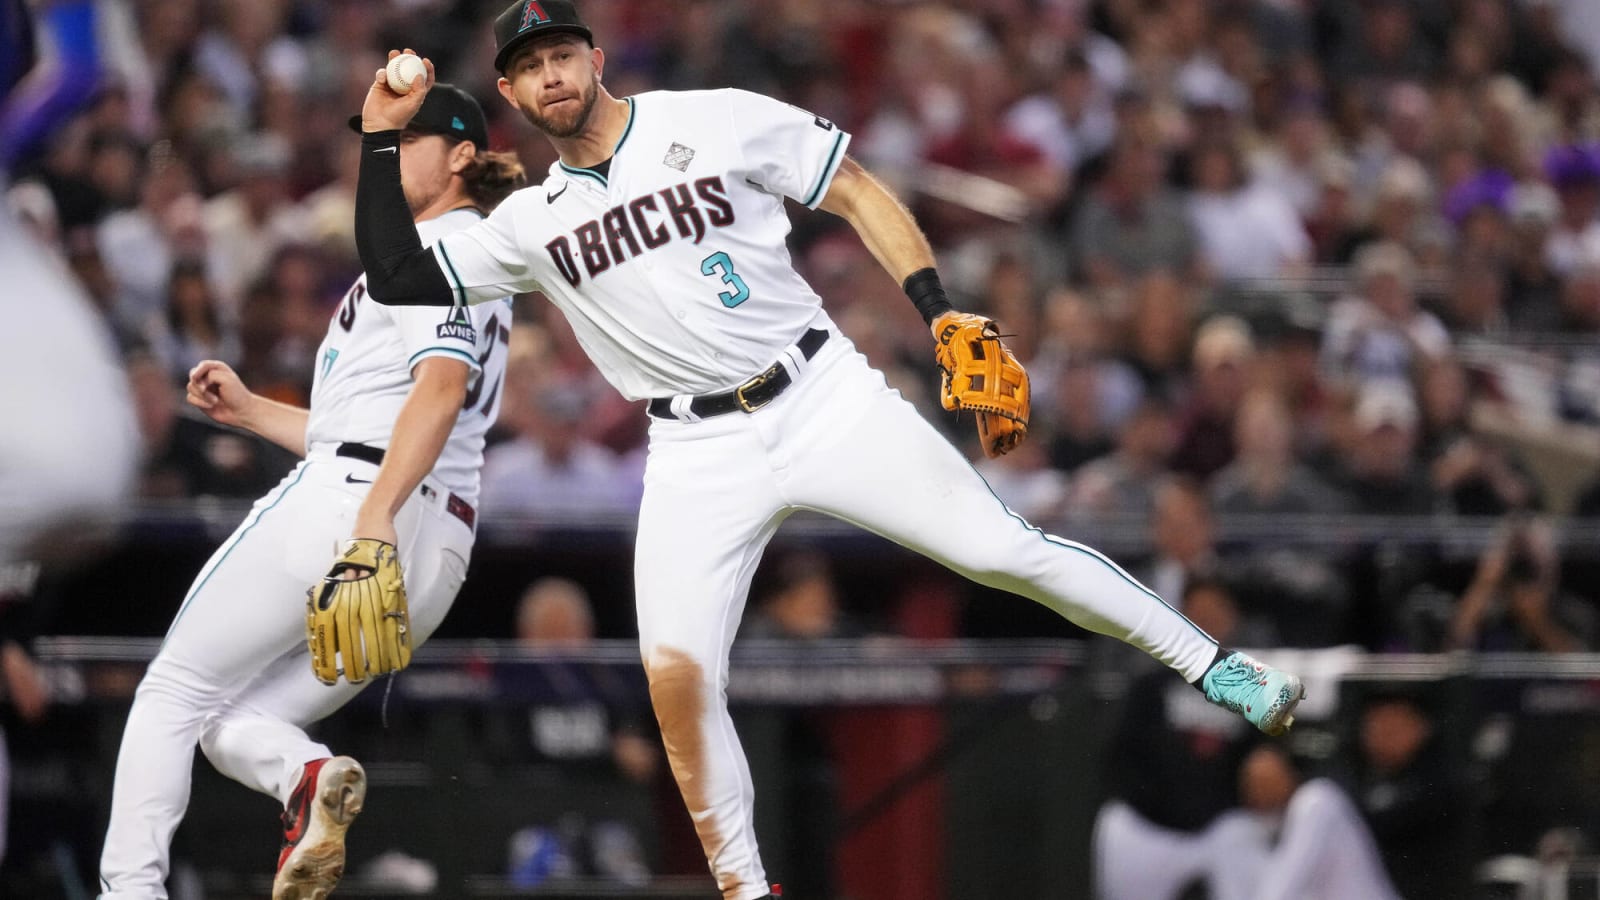 Evan Longoria’s time with the Diamondbacks appears to be done